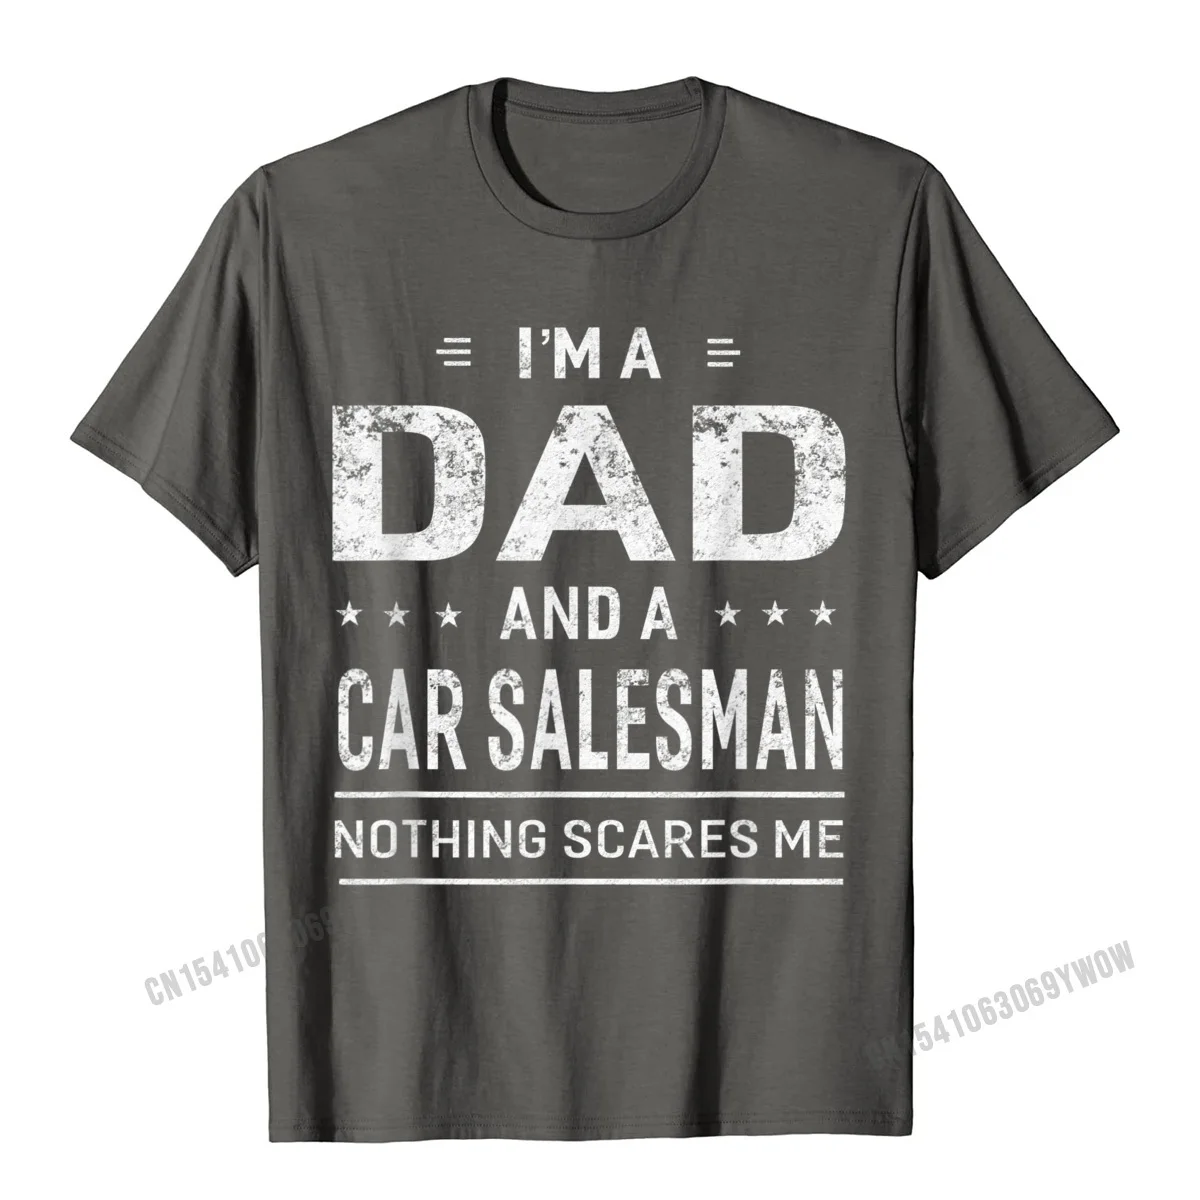 Casual Cool T Shirts Brand New NEW YEAR DAY Short Sleeve O-Neck T Shirt Cotton Boy Custom Tees Drop Shipping Im A Dad And Car Salesman T-shirt For Men Father Funny Gift__852 carbon